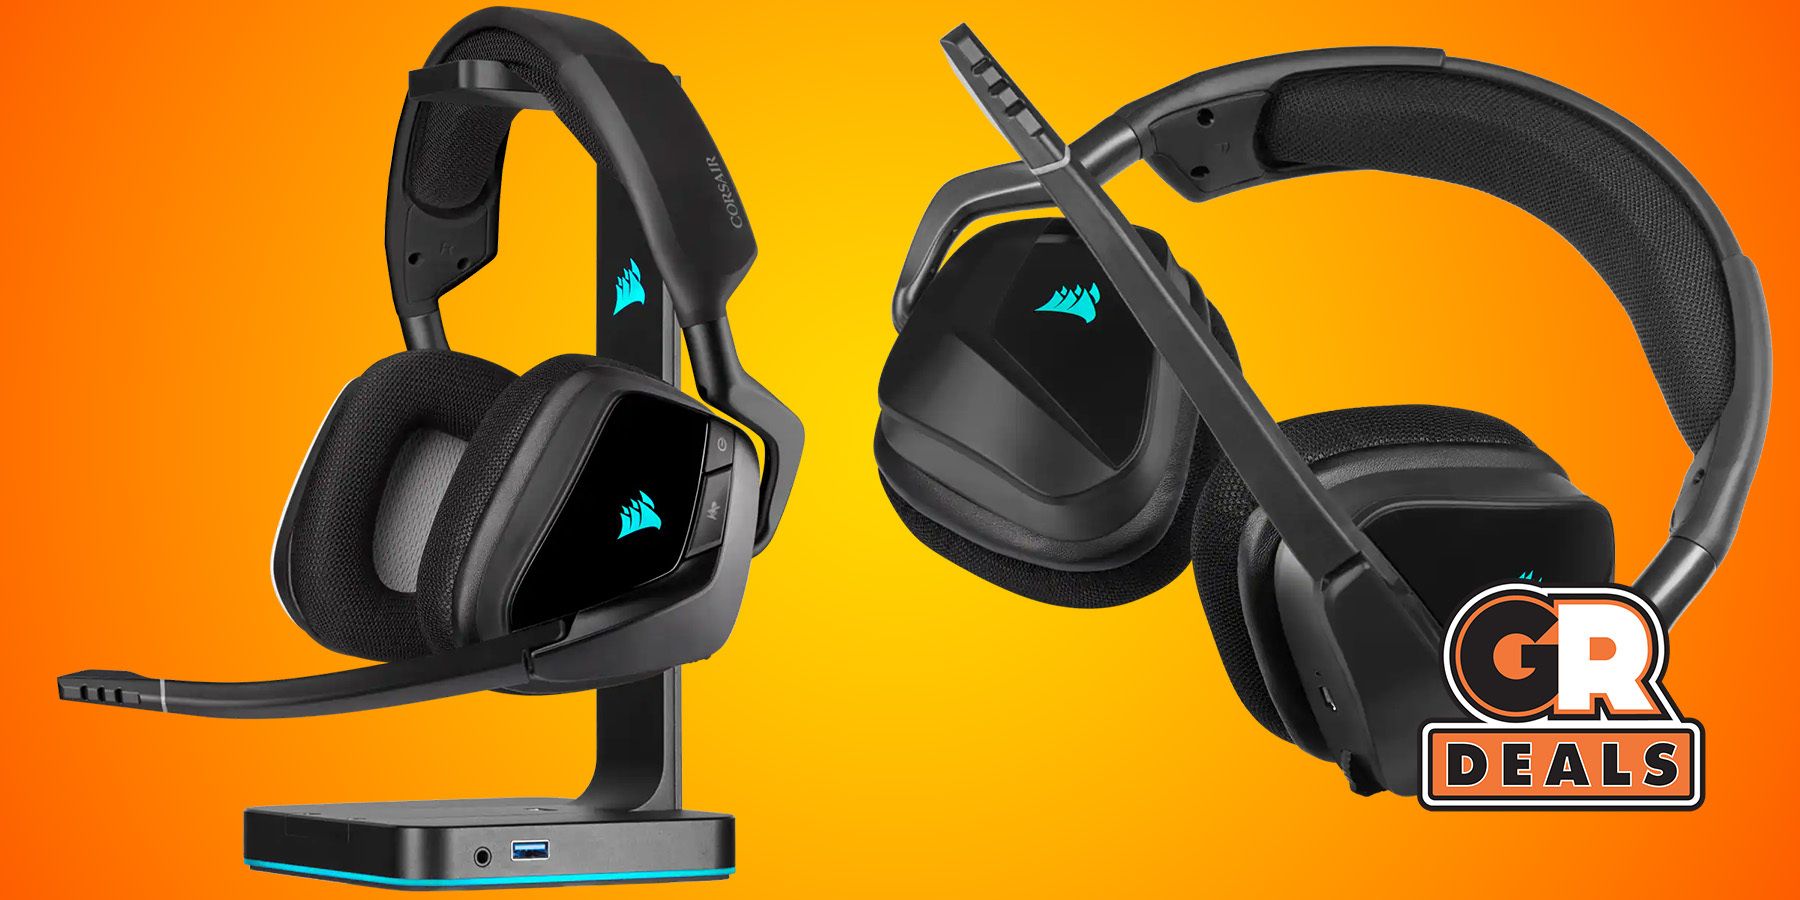 Act Fast and Get the Corsair VOID Gaming Headset for 20% off